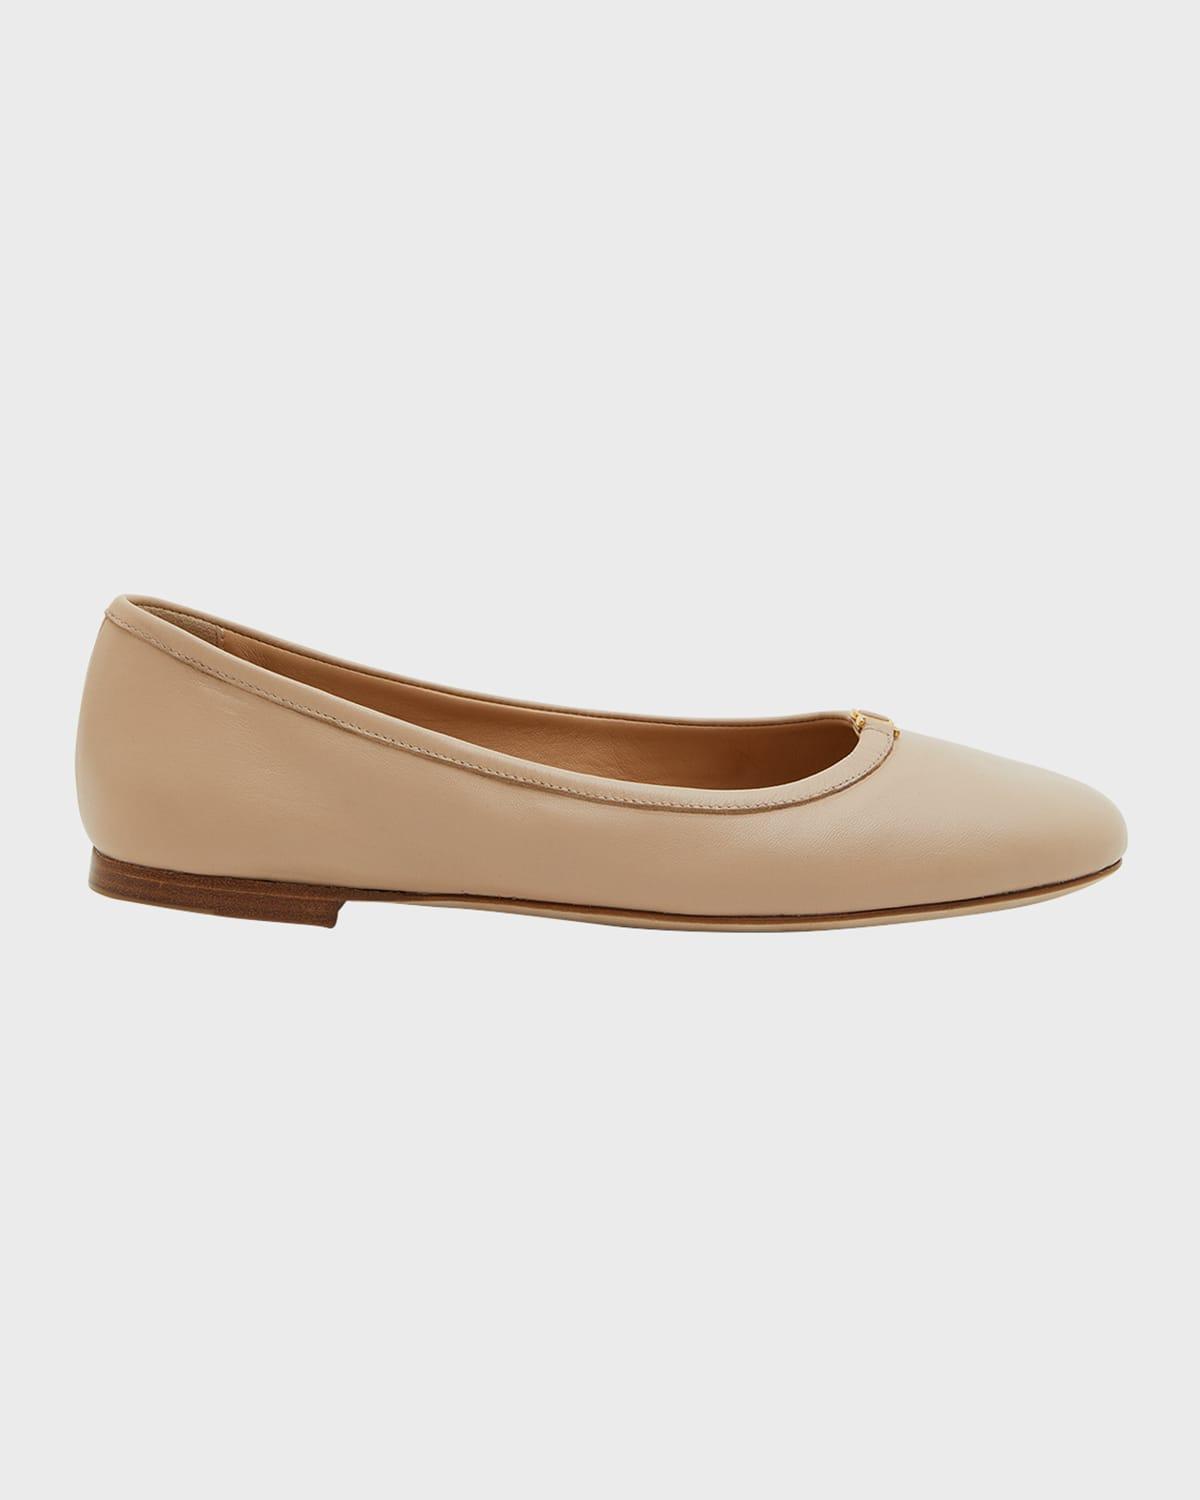 Veralli Leather Bow Ballerina Flats Product Image